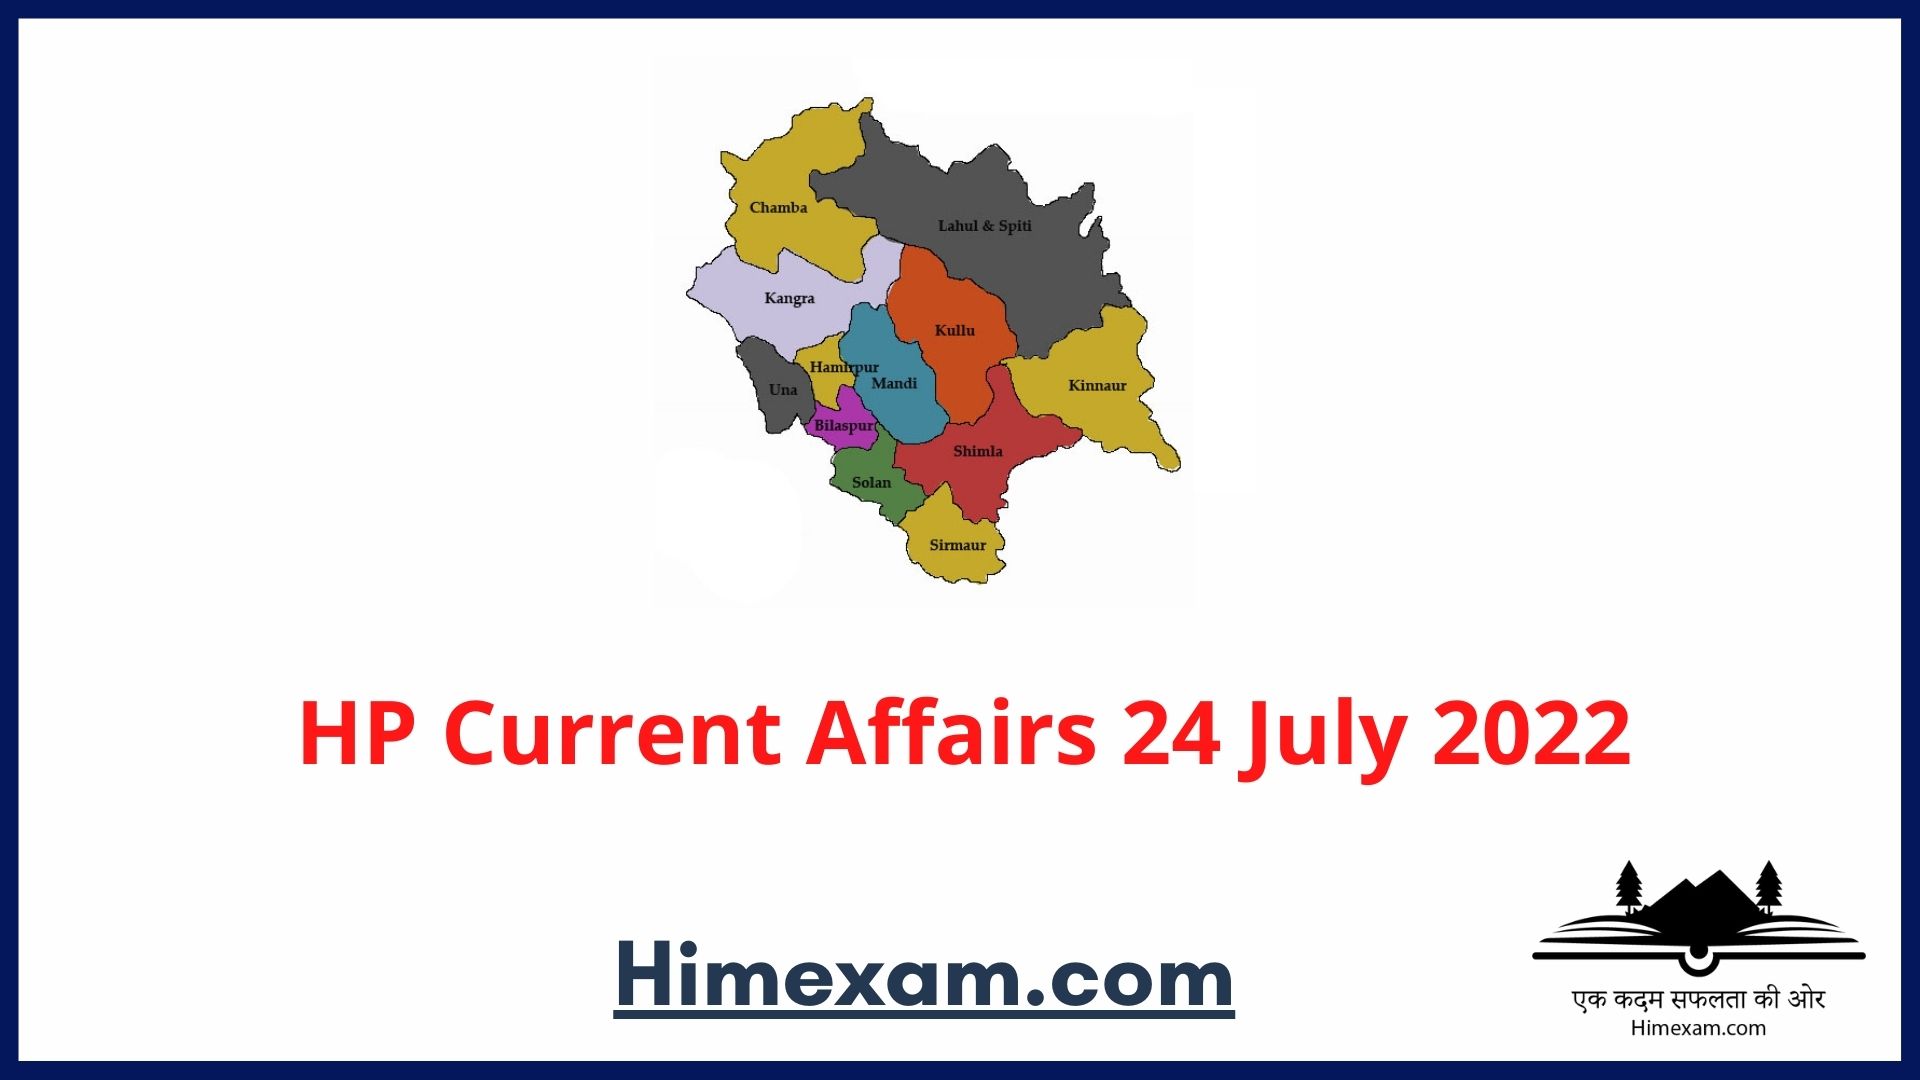 HP Current Affairs 24 July 2022